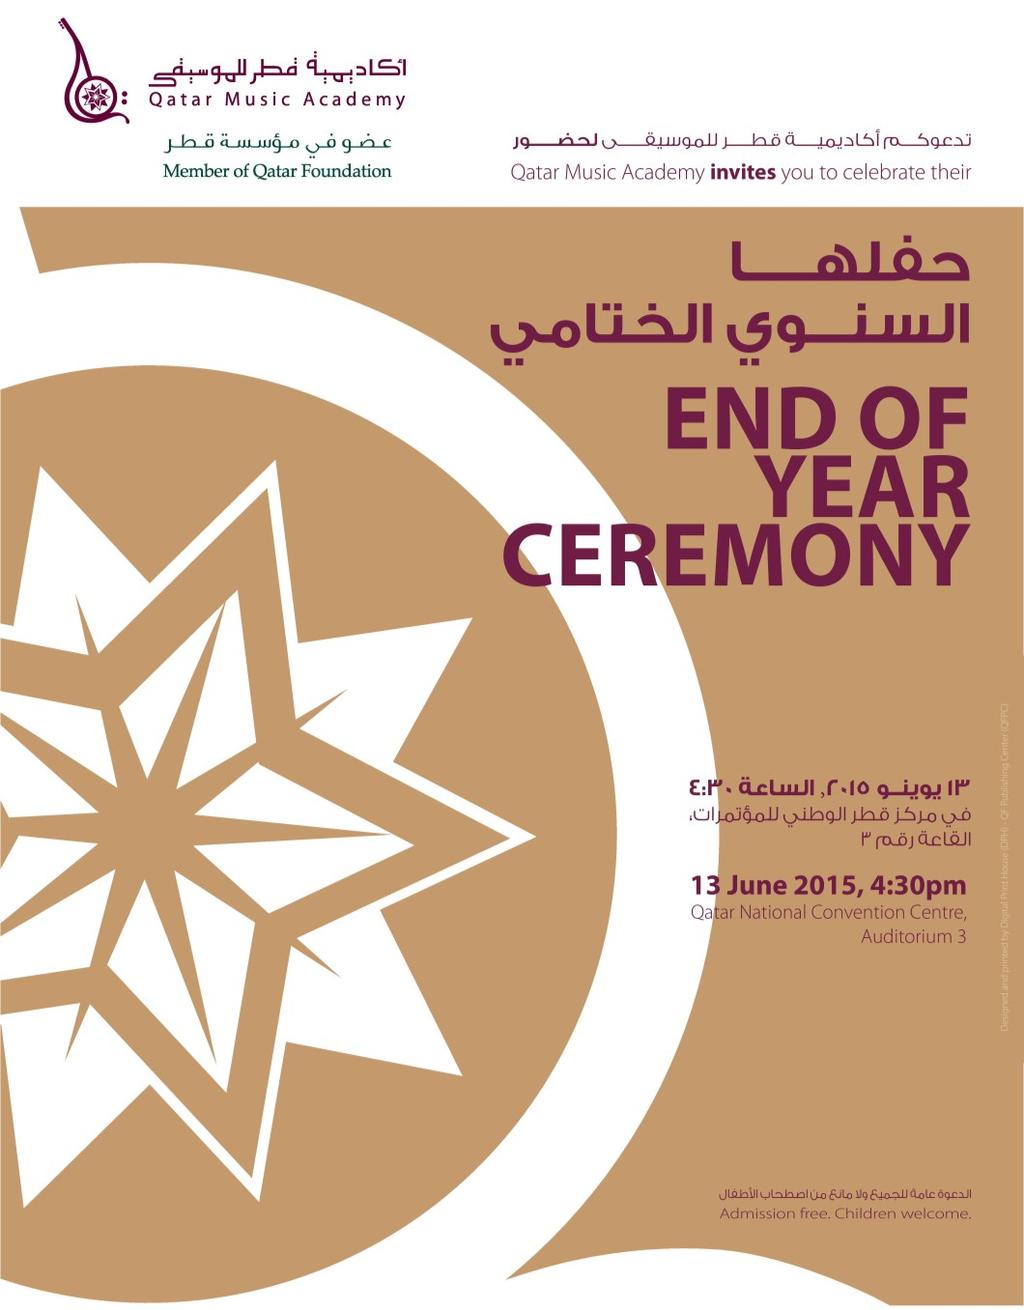 The Ceremony will feature ensembles from the Arab and Western departments as well as a speech from our principal, Dr. Abdul Ghafour Al Heeti. It will take place on Saturday, 13 June at 4.